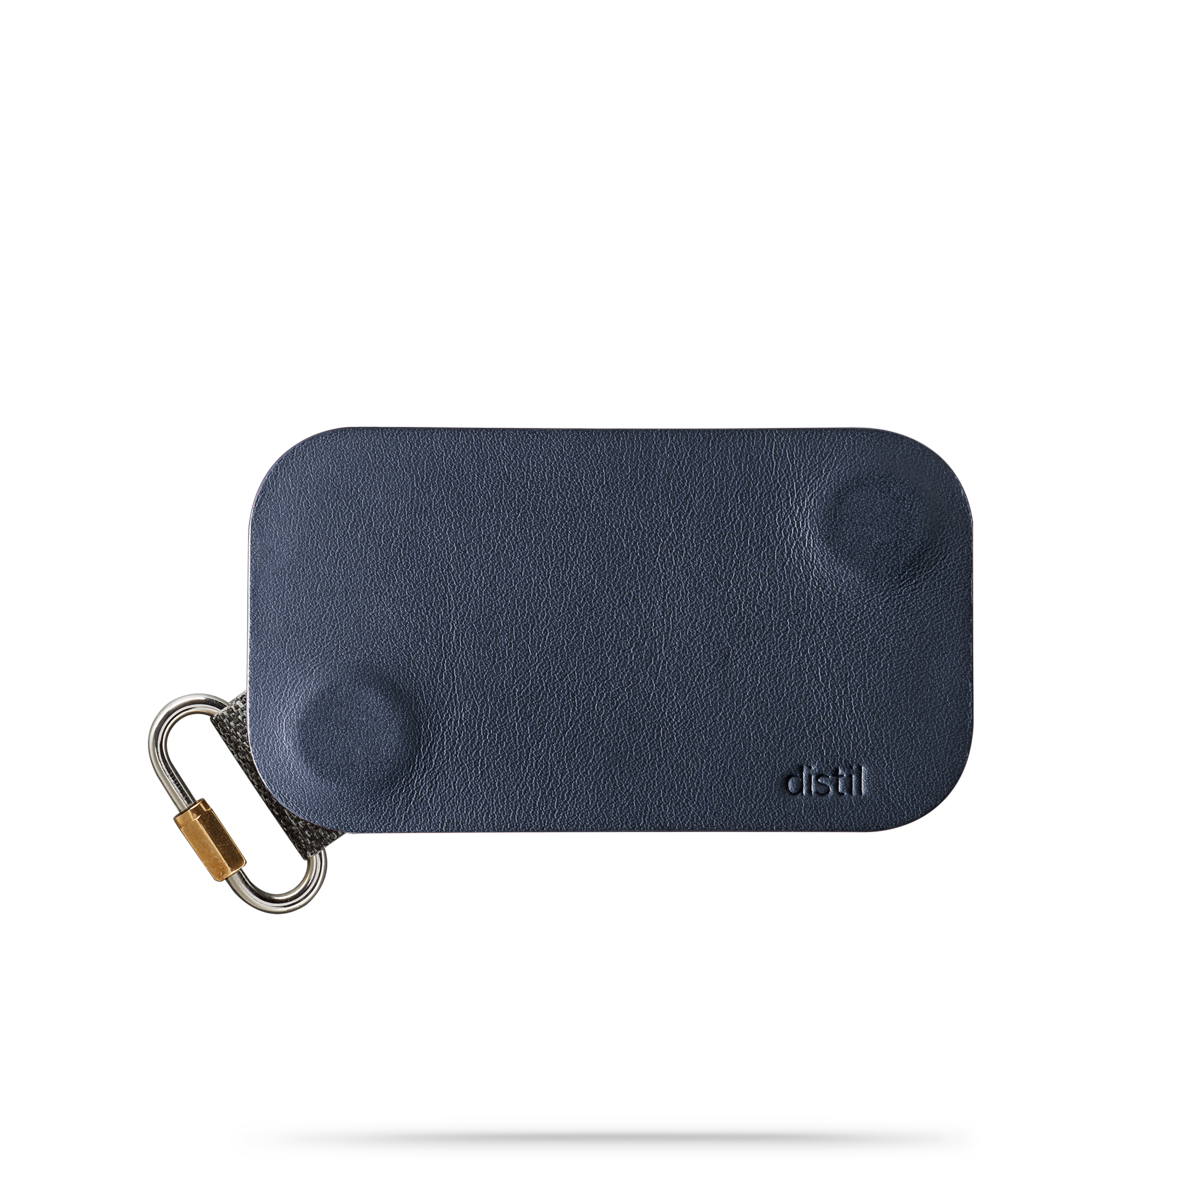 distil navy leather keyfolio with attached fobring on a white backdrop